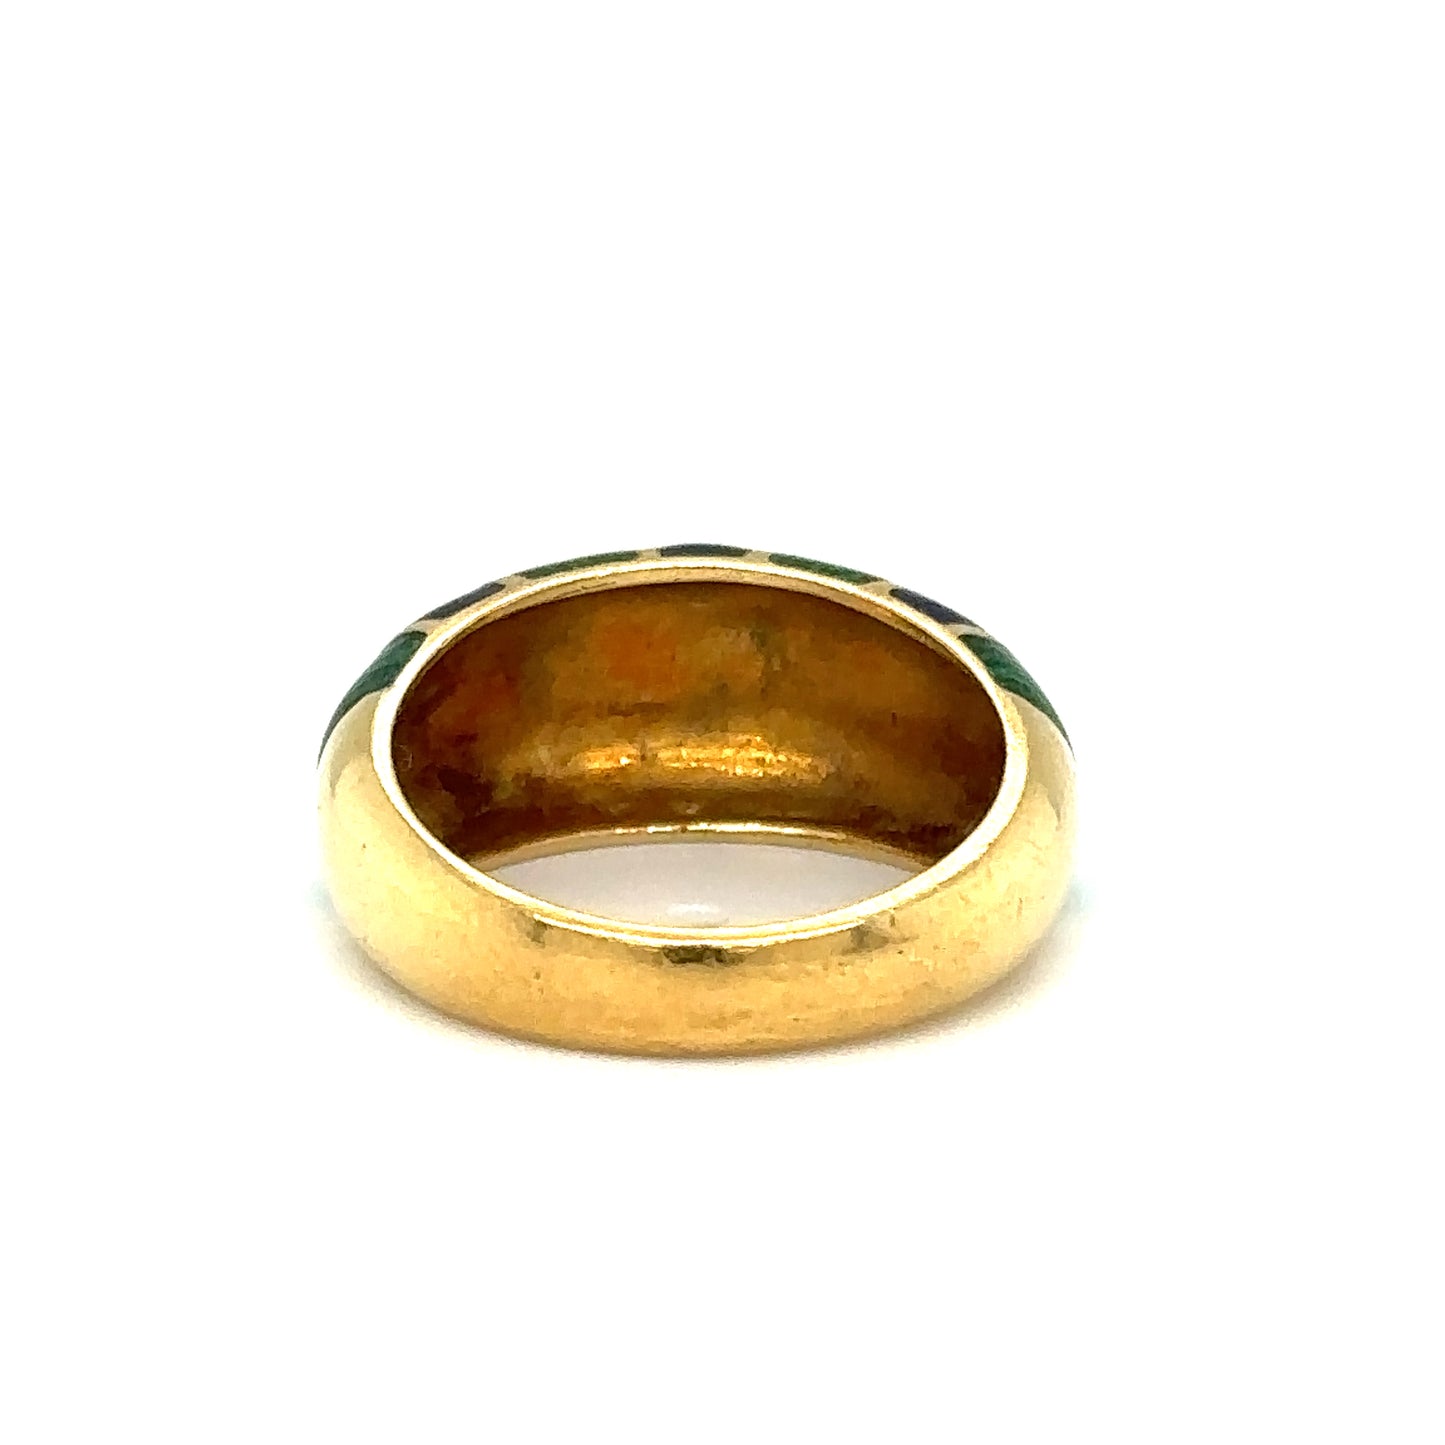 Circa 1960s TIFFANY & CO. Enameled Band Ring in 18K Gold